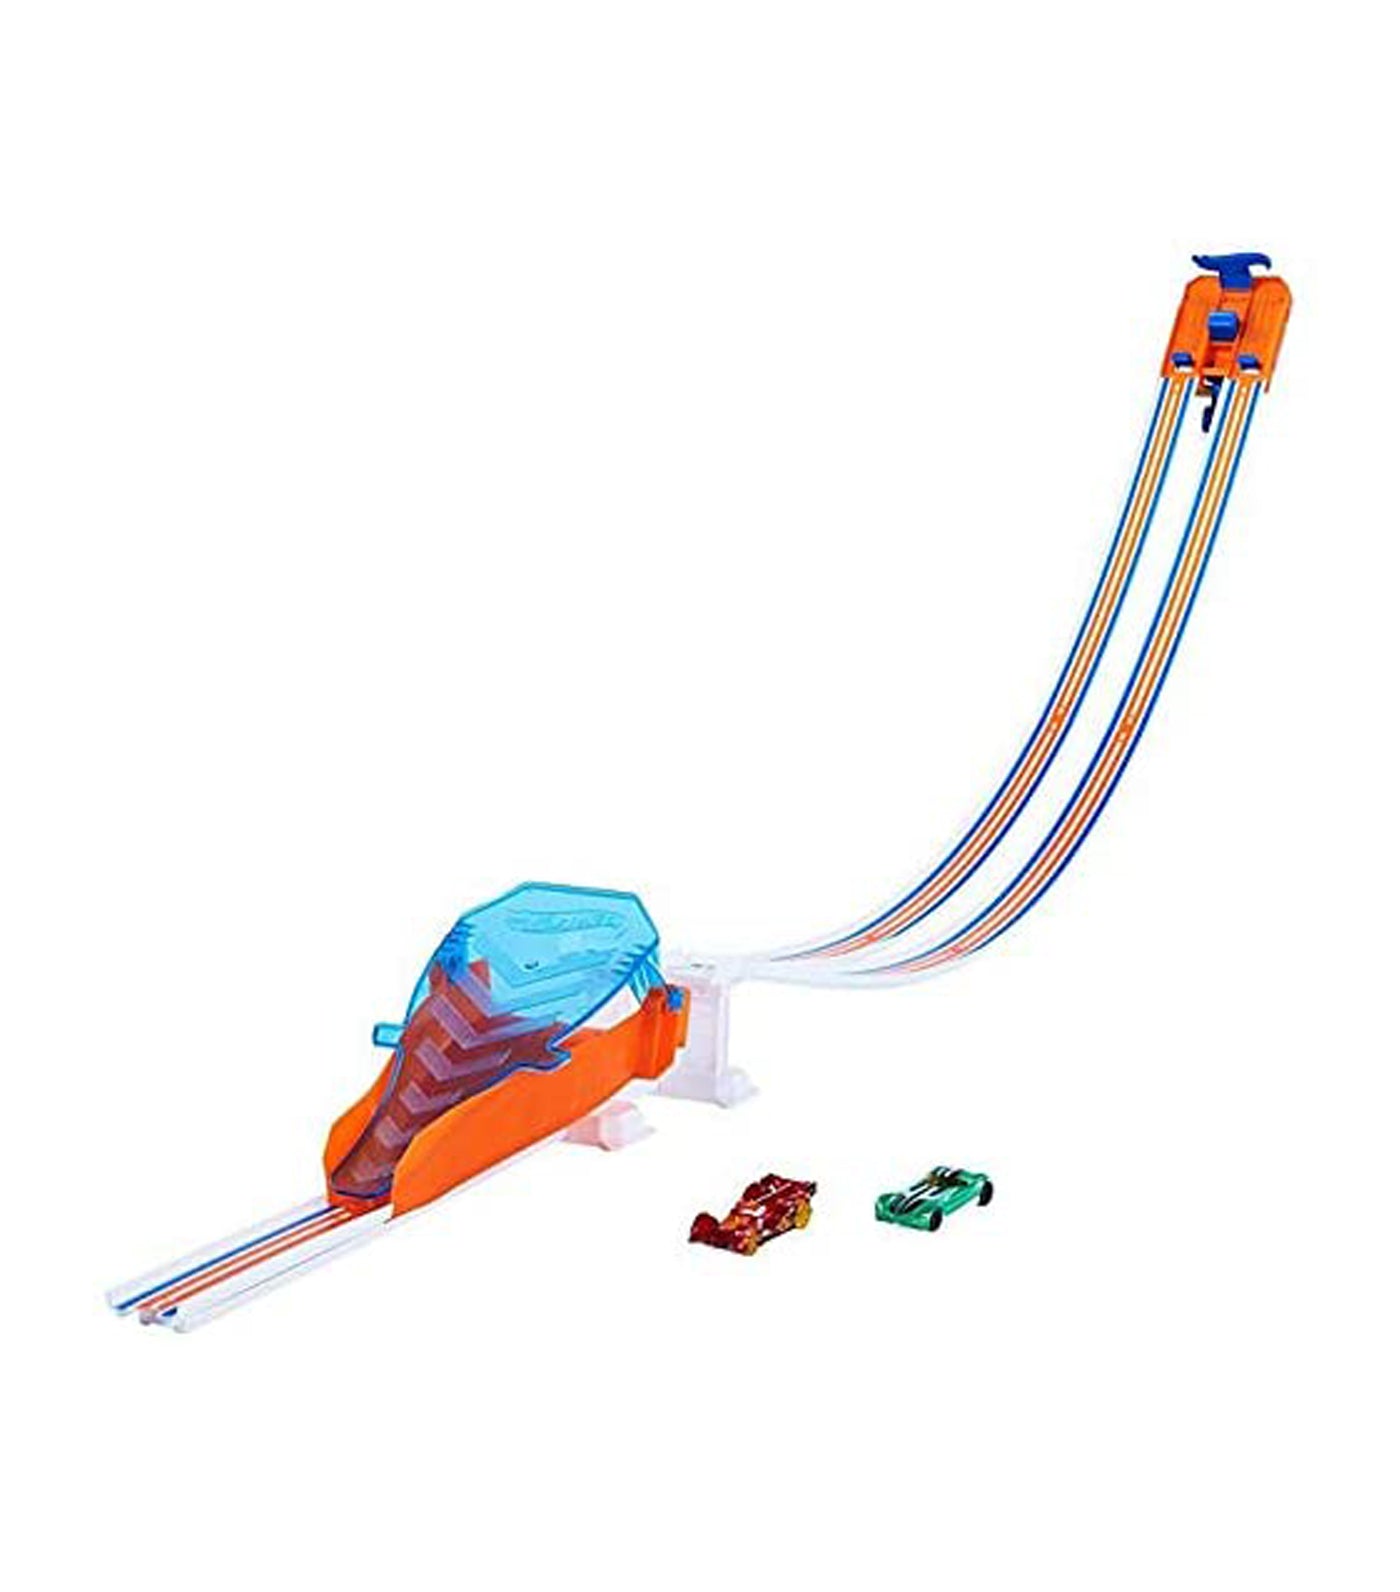 Flying Customs Race and Jump Trackset